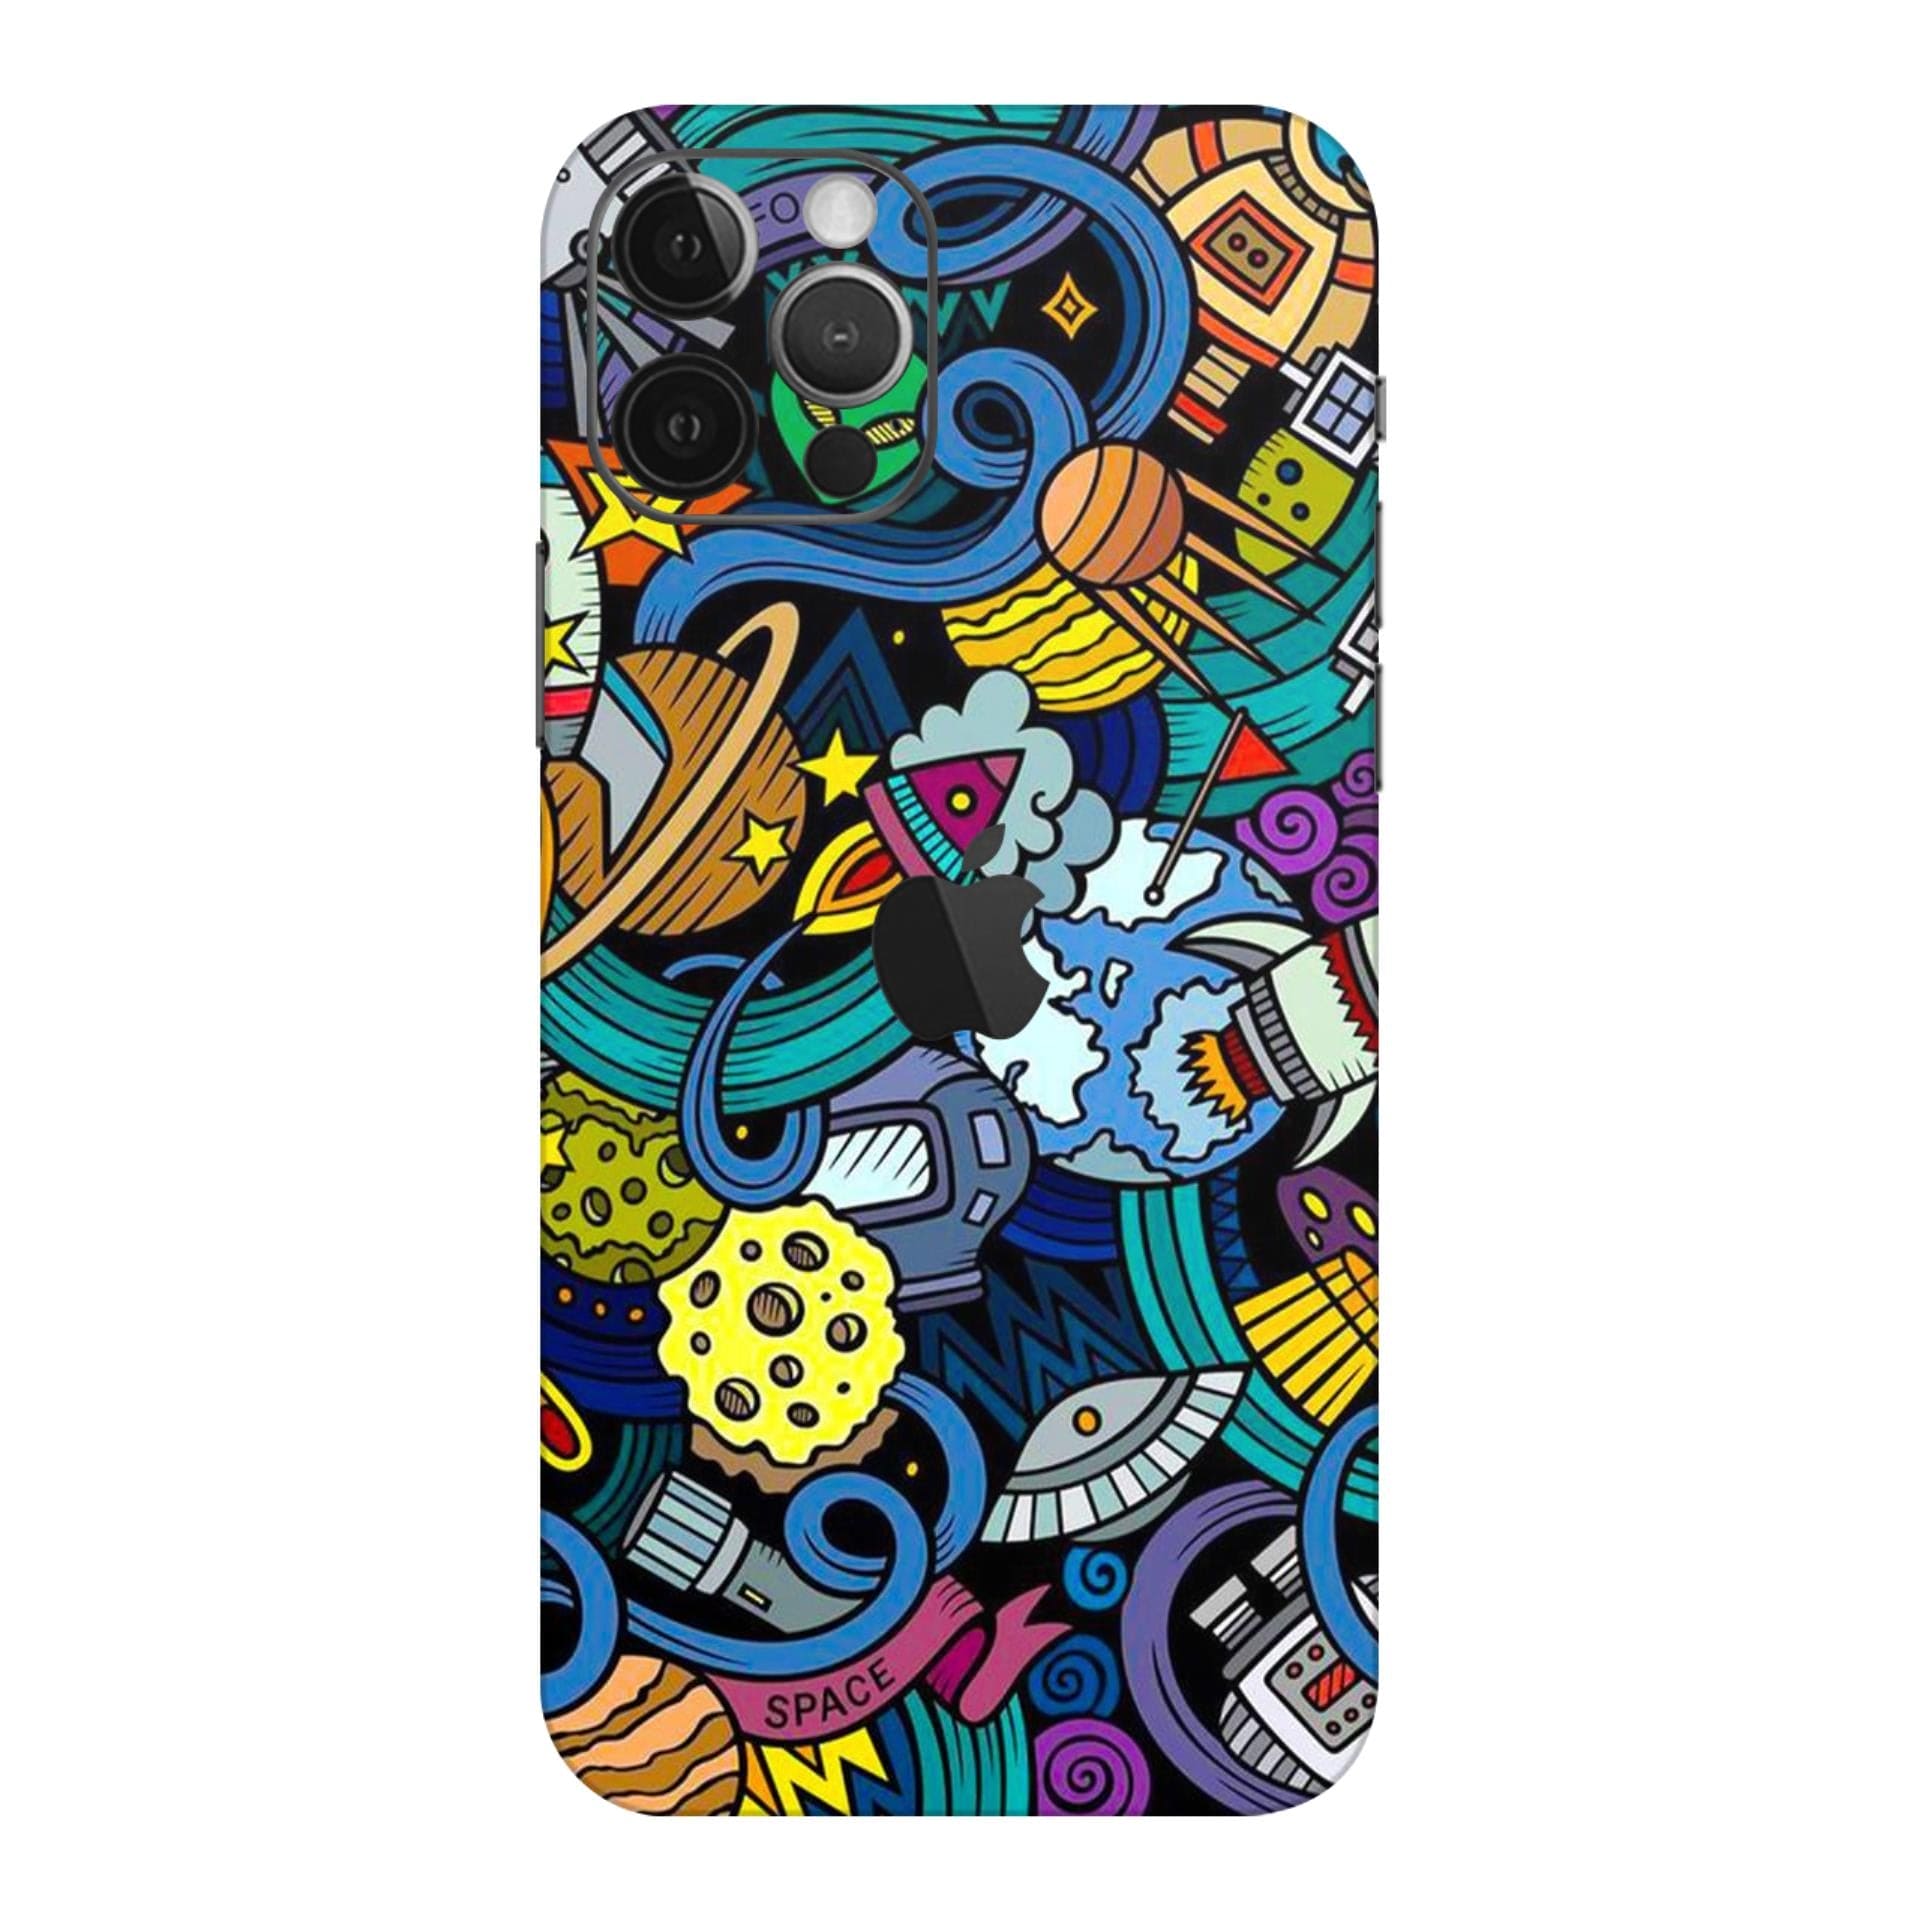 iphone 12 Pro Max Space Doodle skins